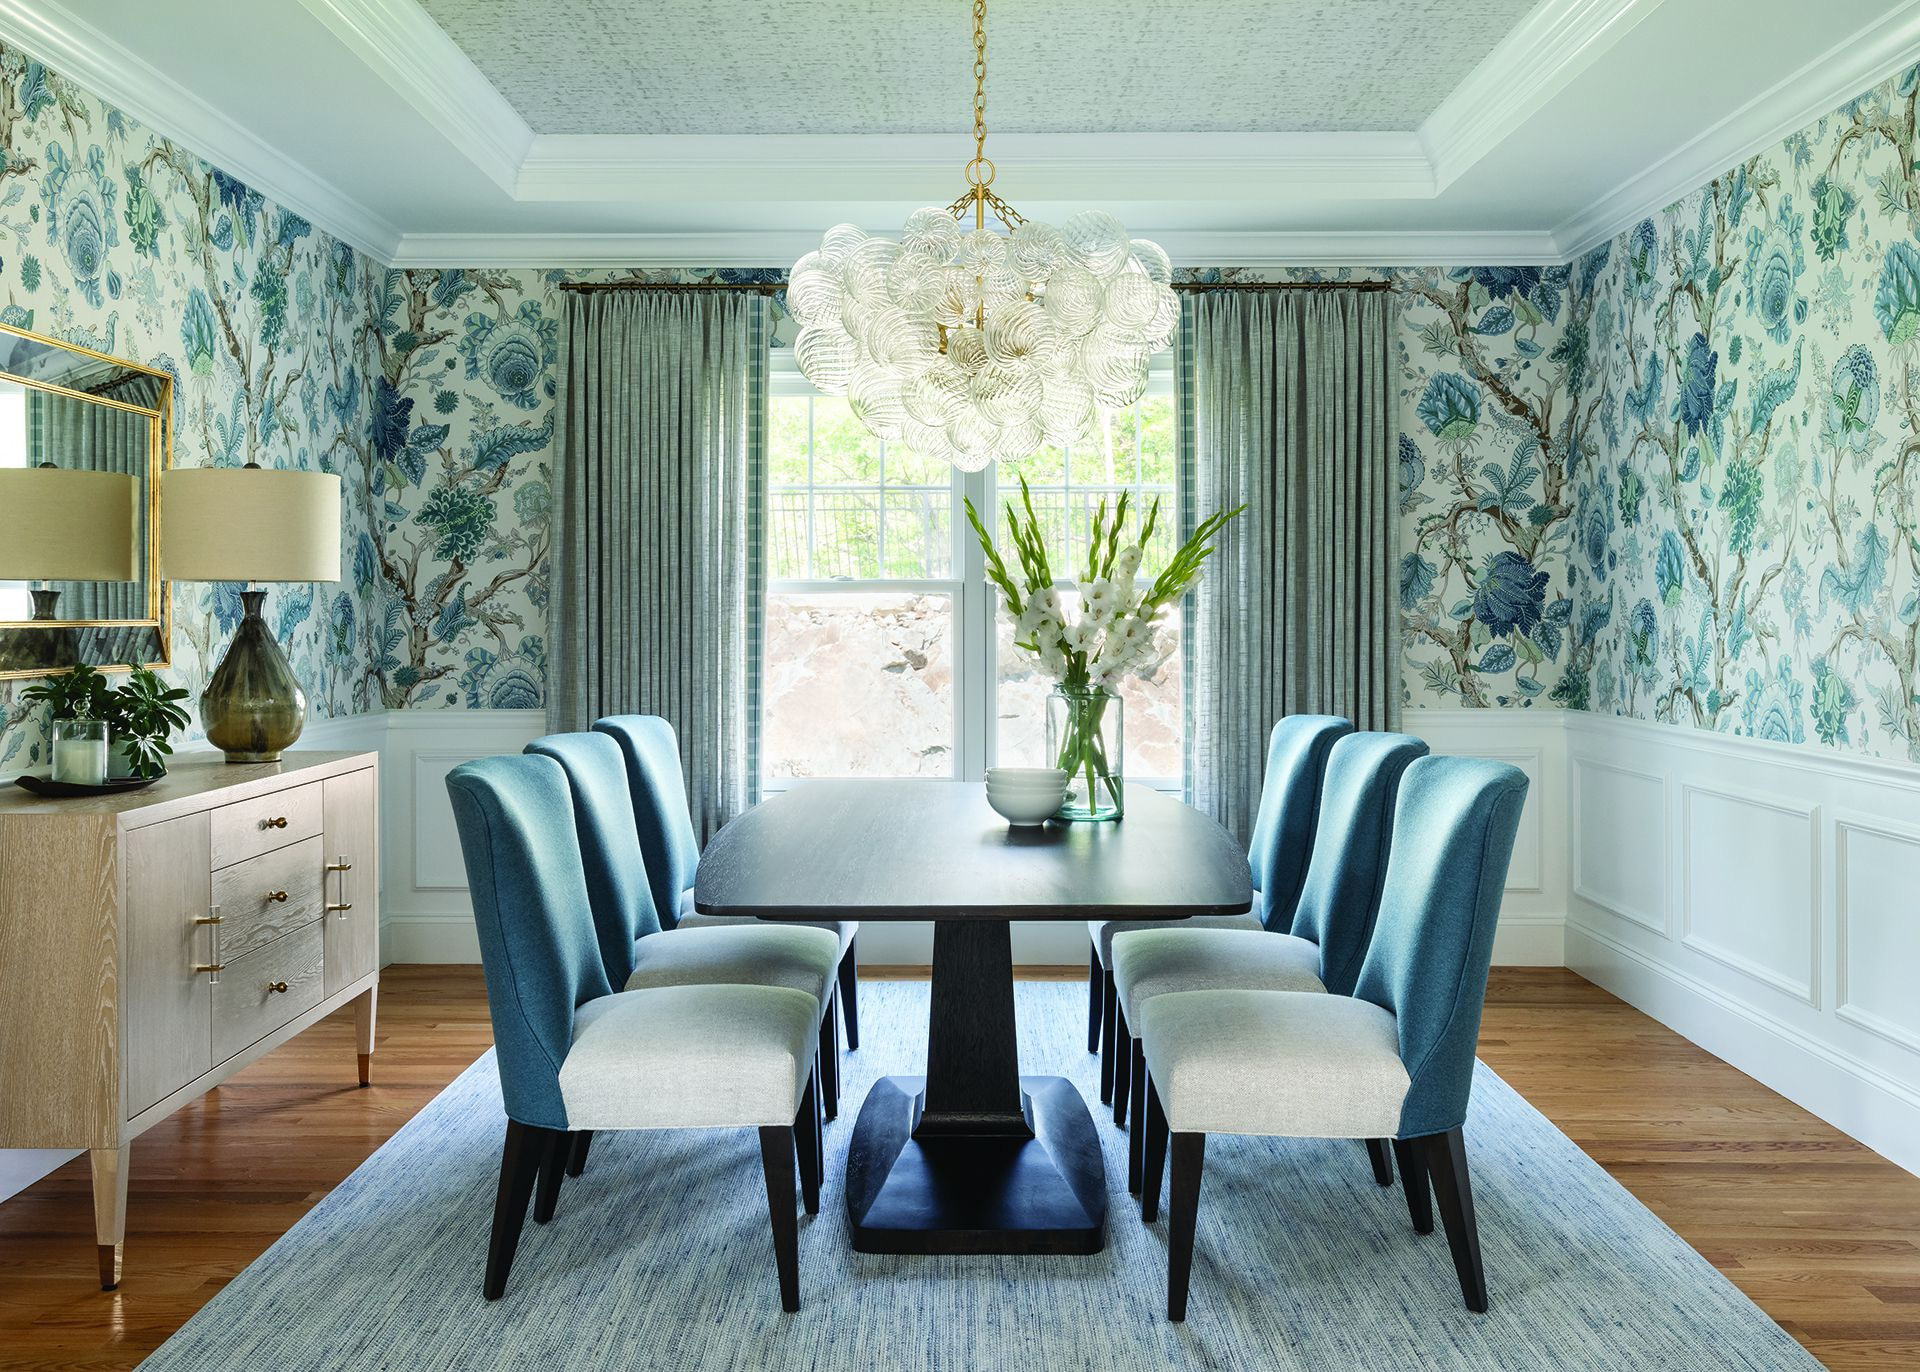 Home design ideas: A traditional dining room with an infusion of flare